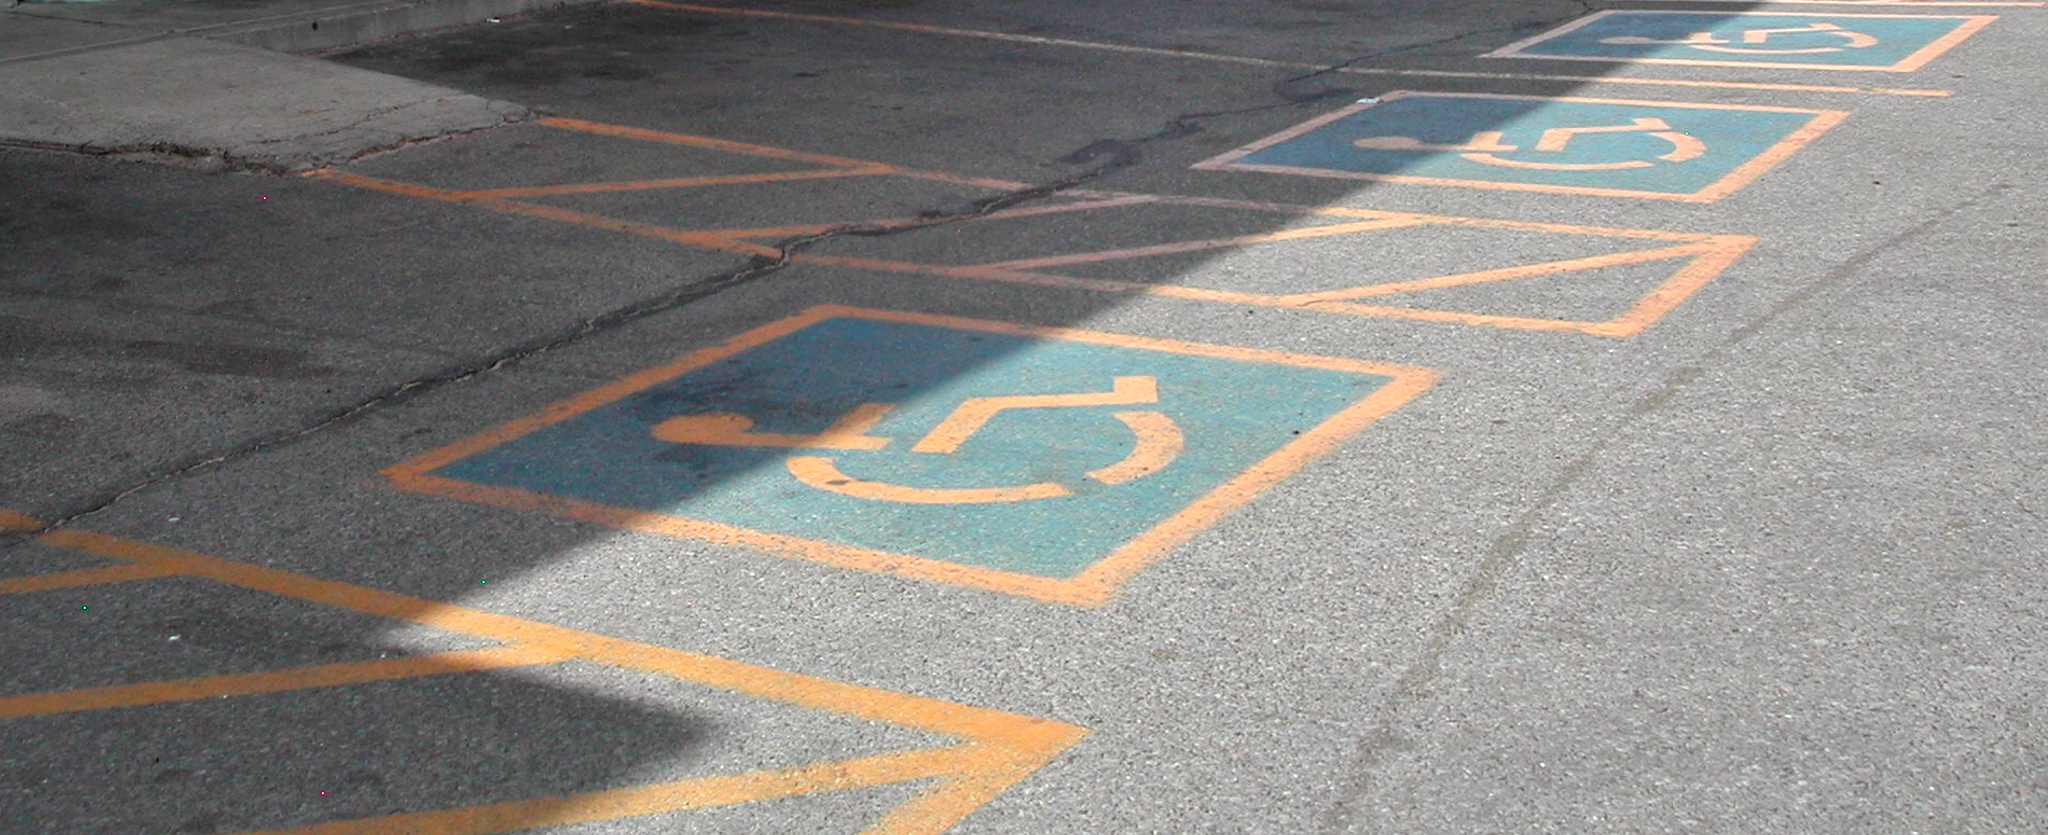 Parking Lot Striping - before